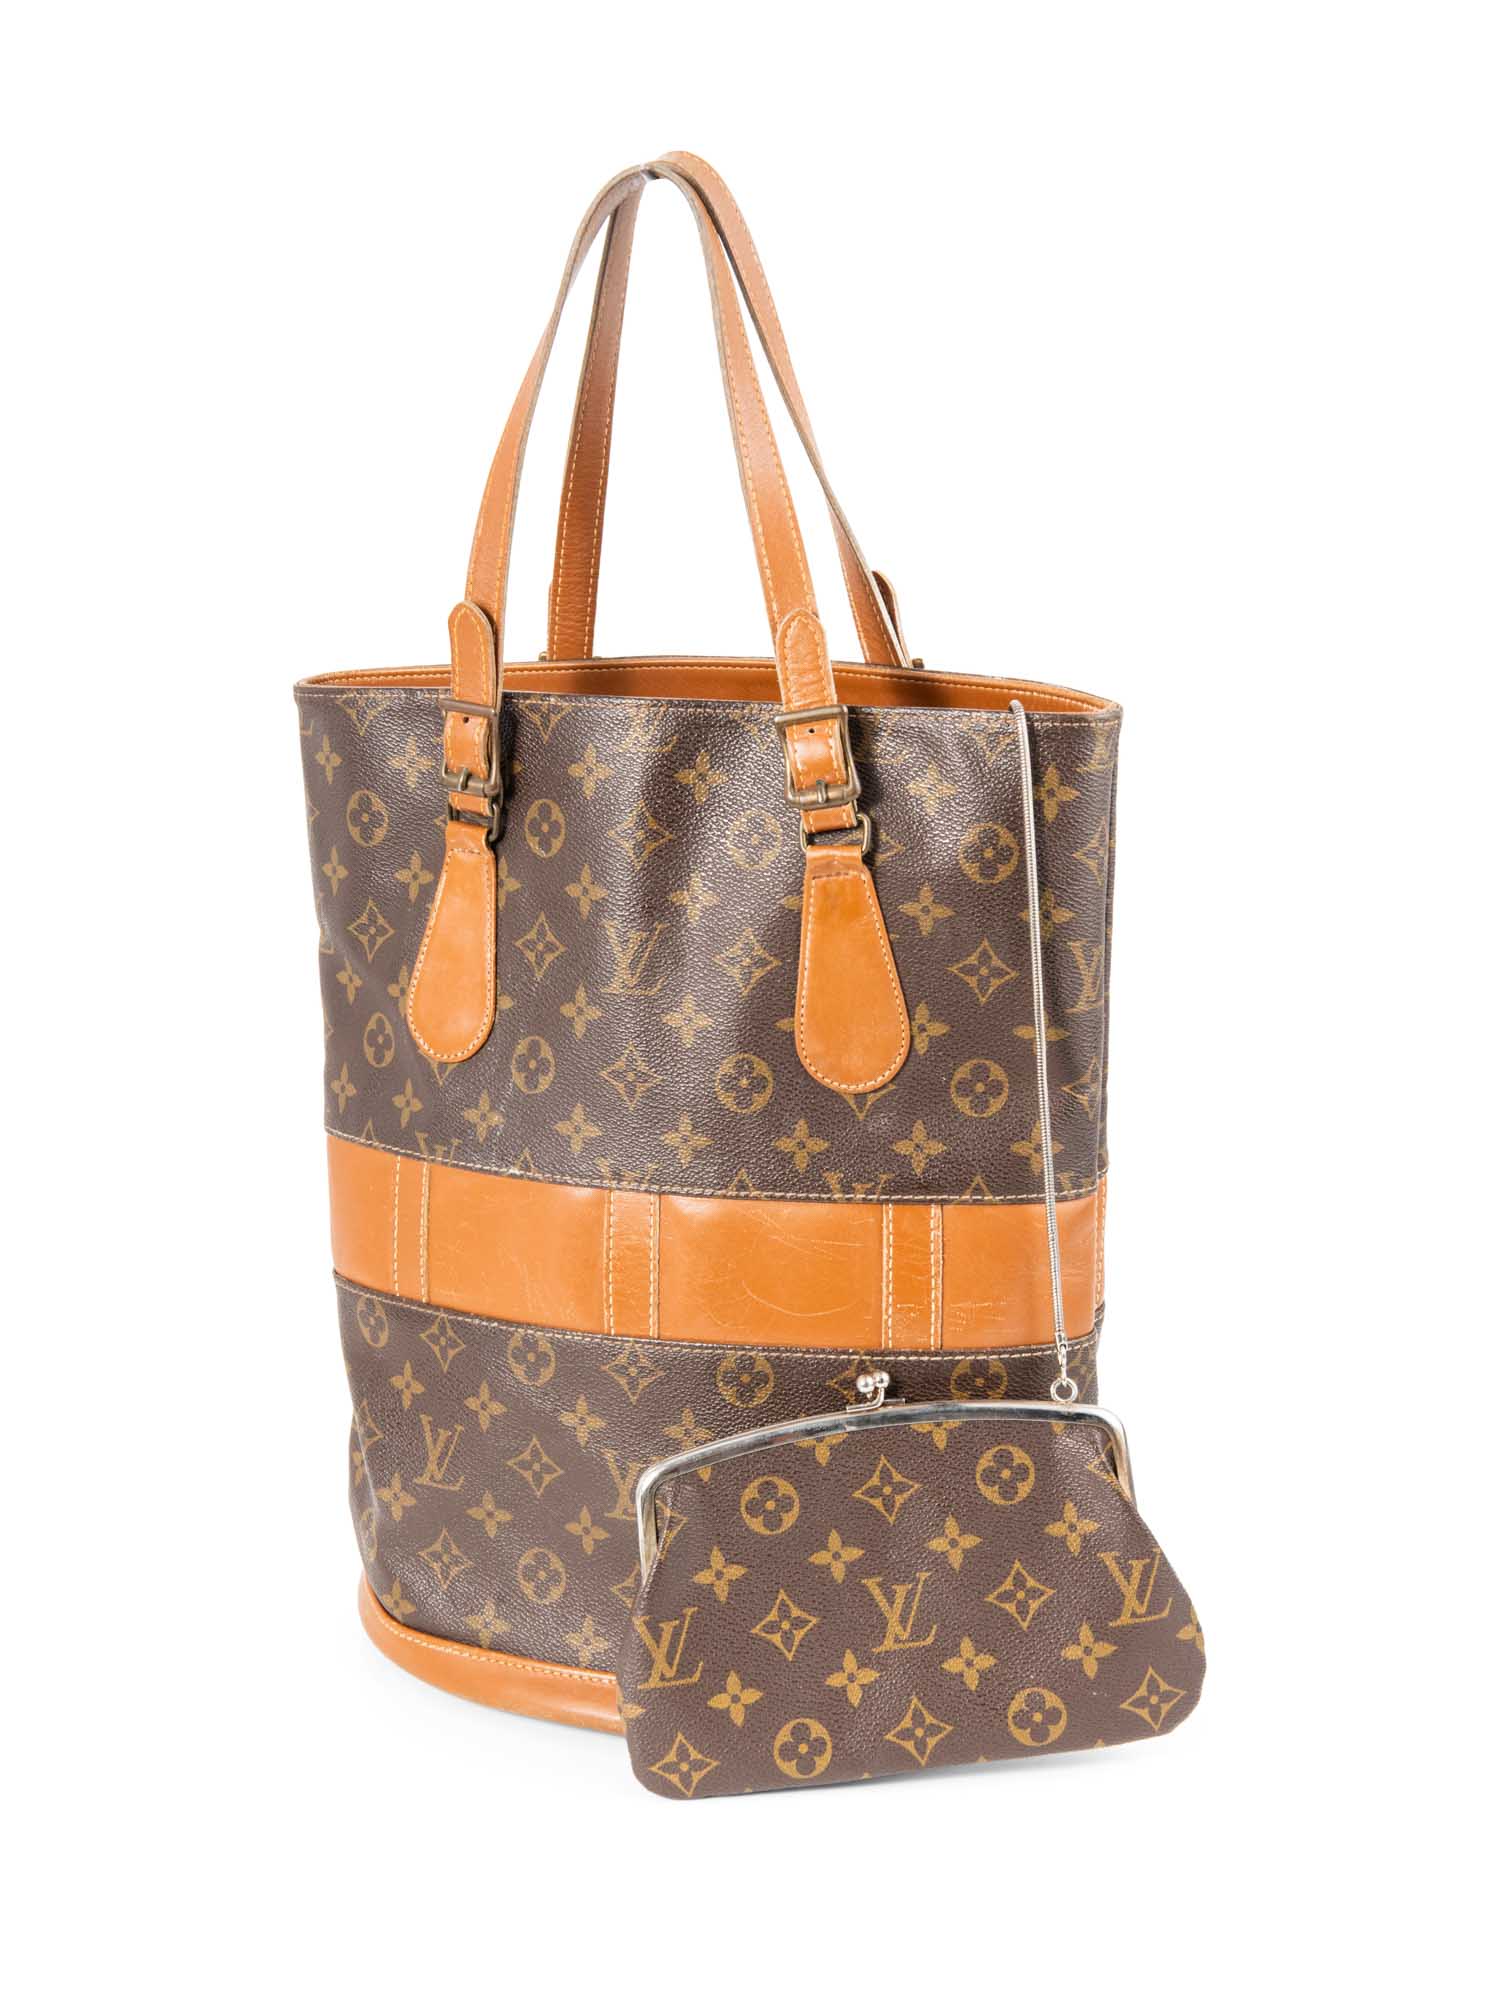 A Louis Vuitton Neverfull Size Guide - Academy by FASHIONPHILE